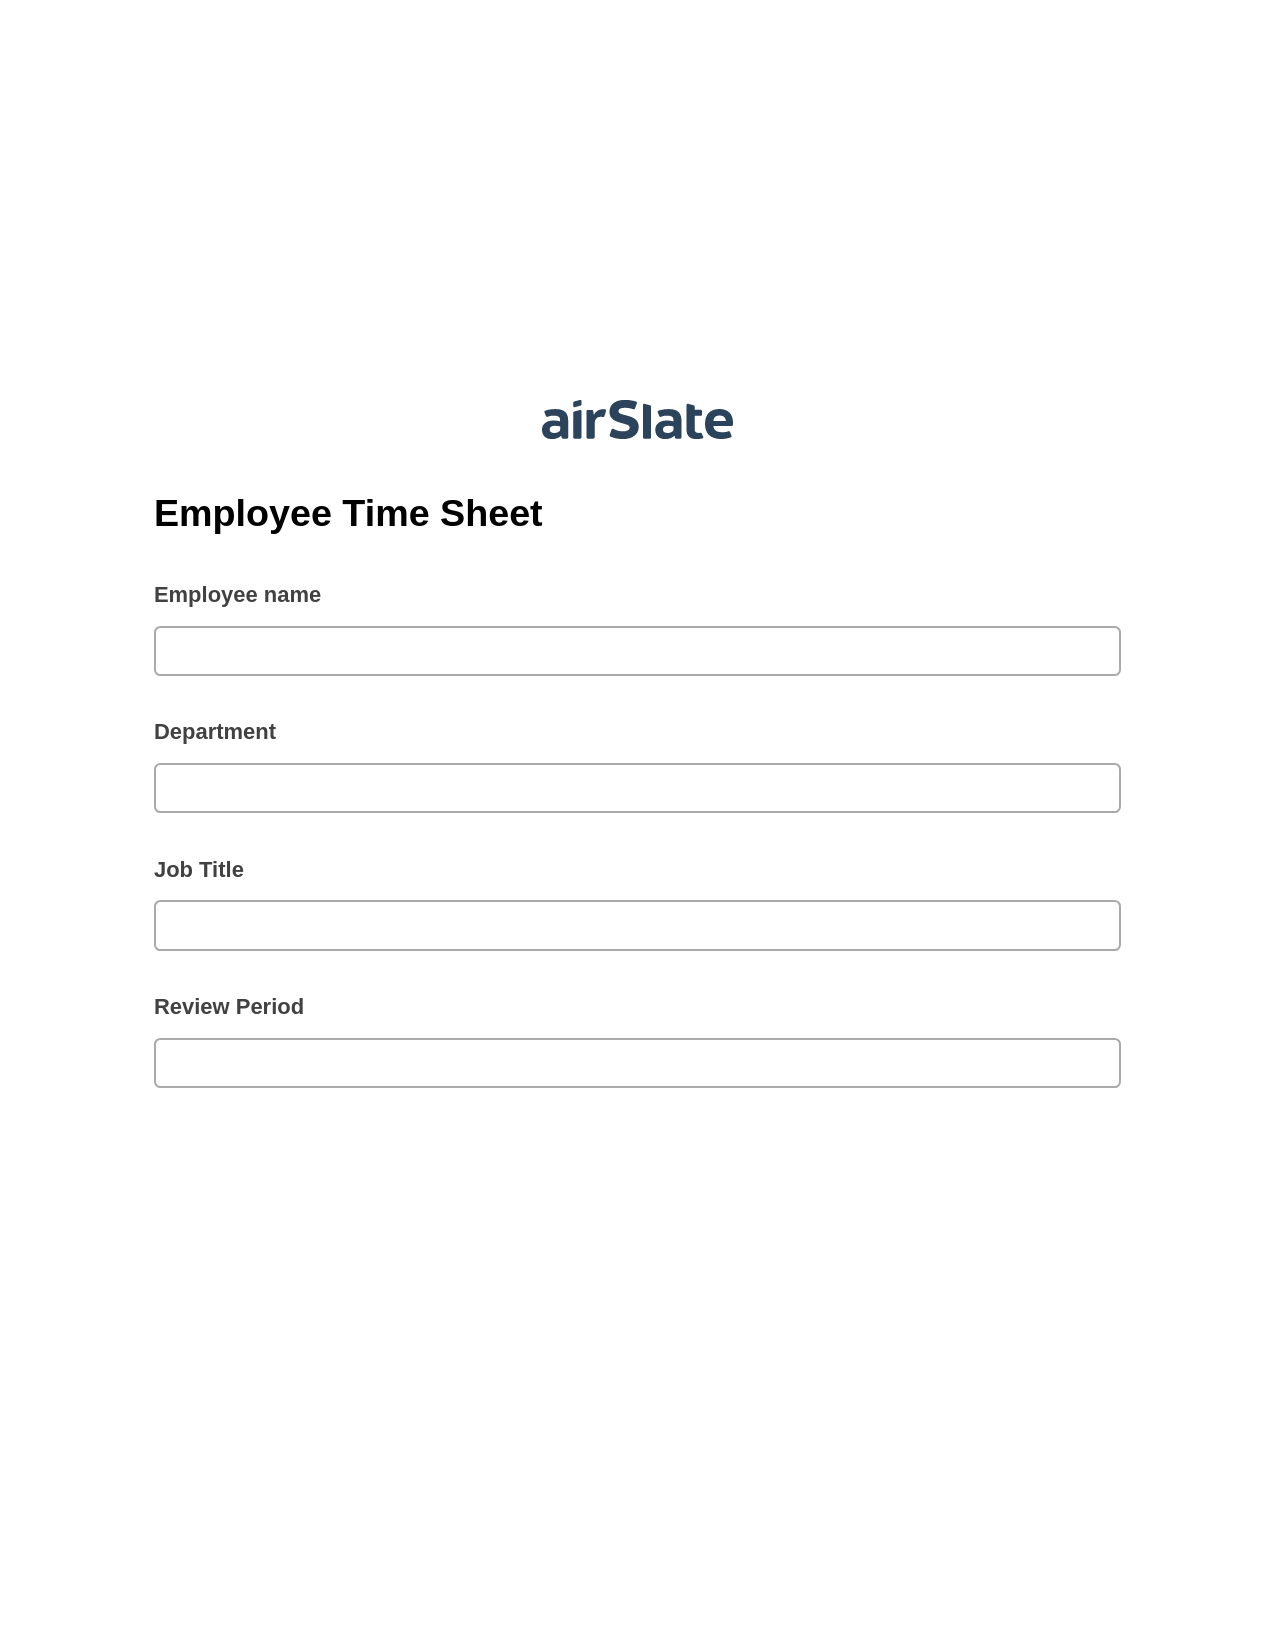 Employee Time Sheet Pre-fill from CSV File Bot, Create Salesforce Records Bot, Archive to OneDrive Bot